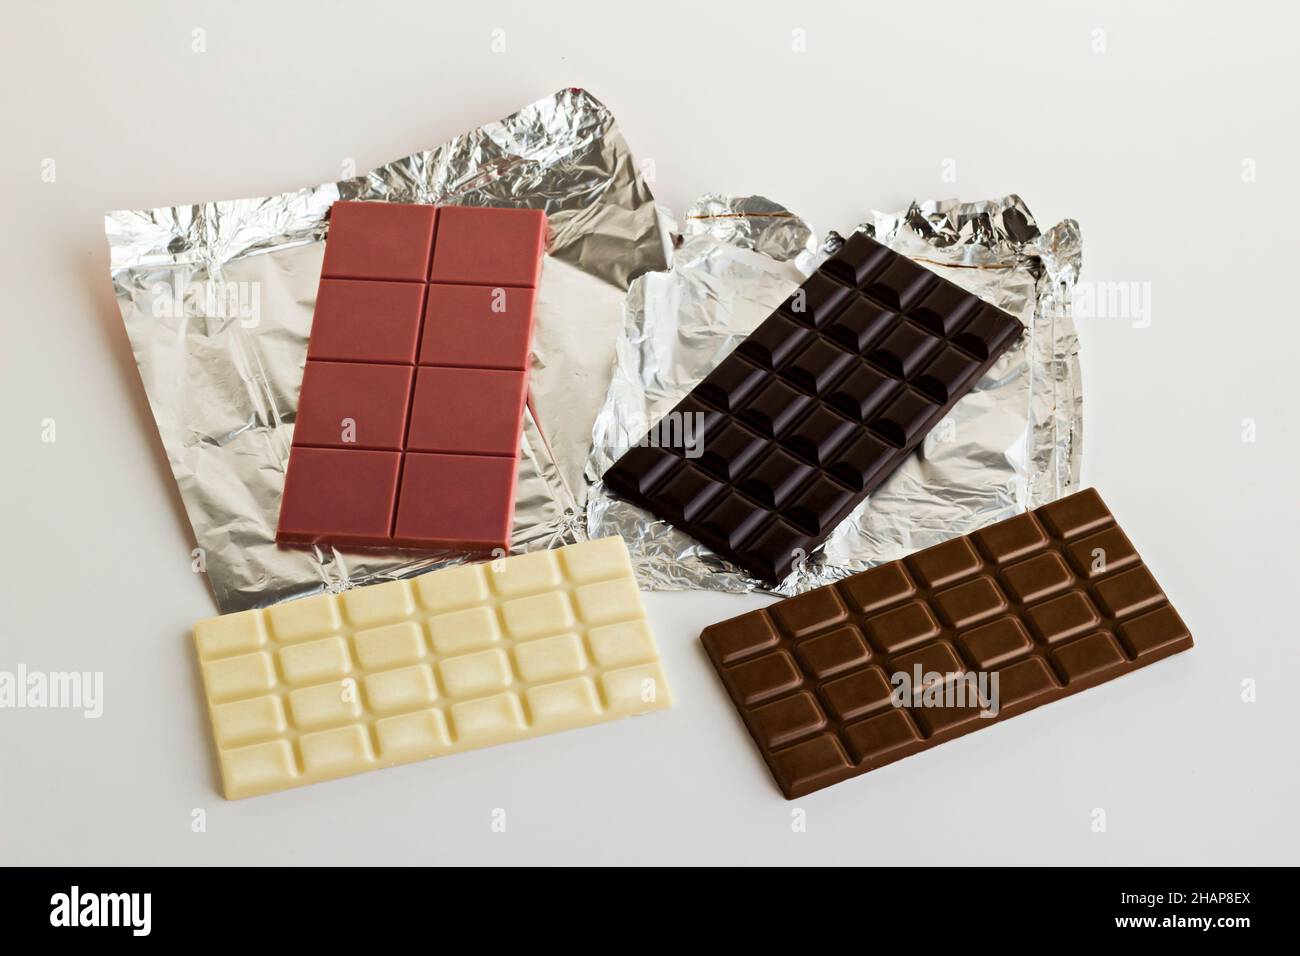 Fourth type in chocolate: Ruby on the aluminum own packaging with bitter,milky and white chocolate.Above view. Stock Photo